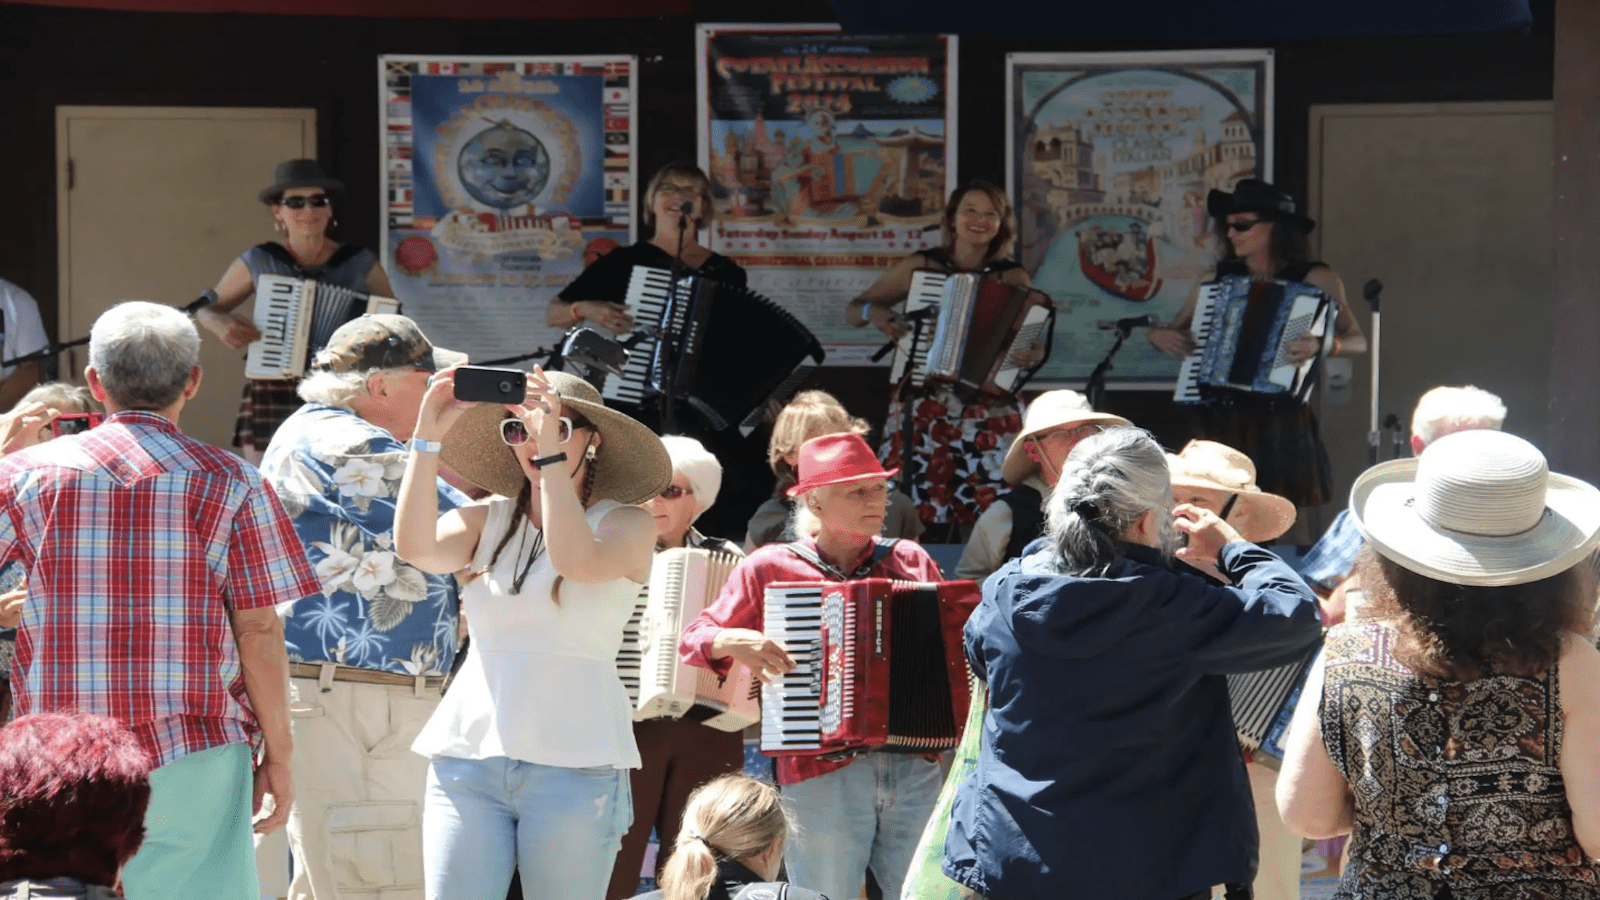 People gather to hear accordians at Cotati Accordian Festival in North Bay